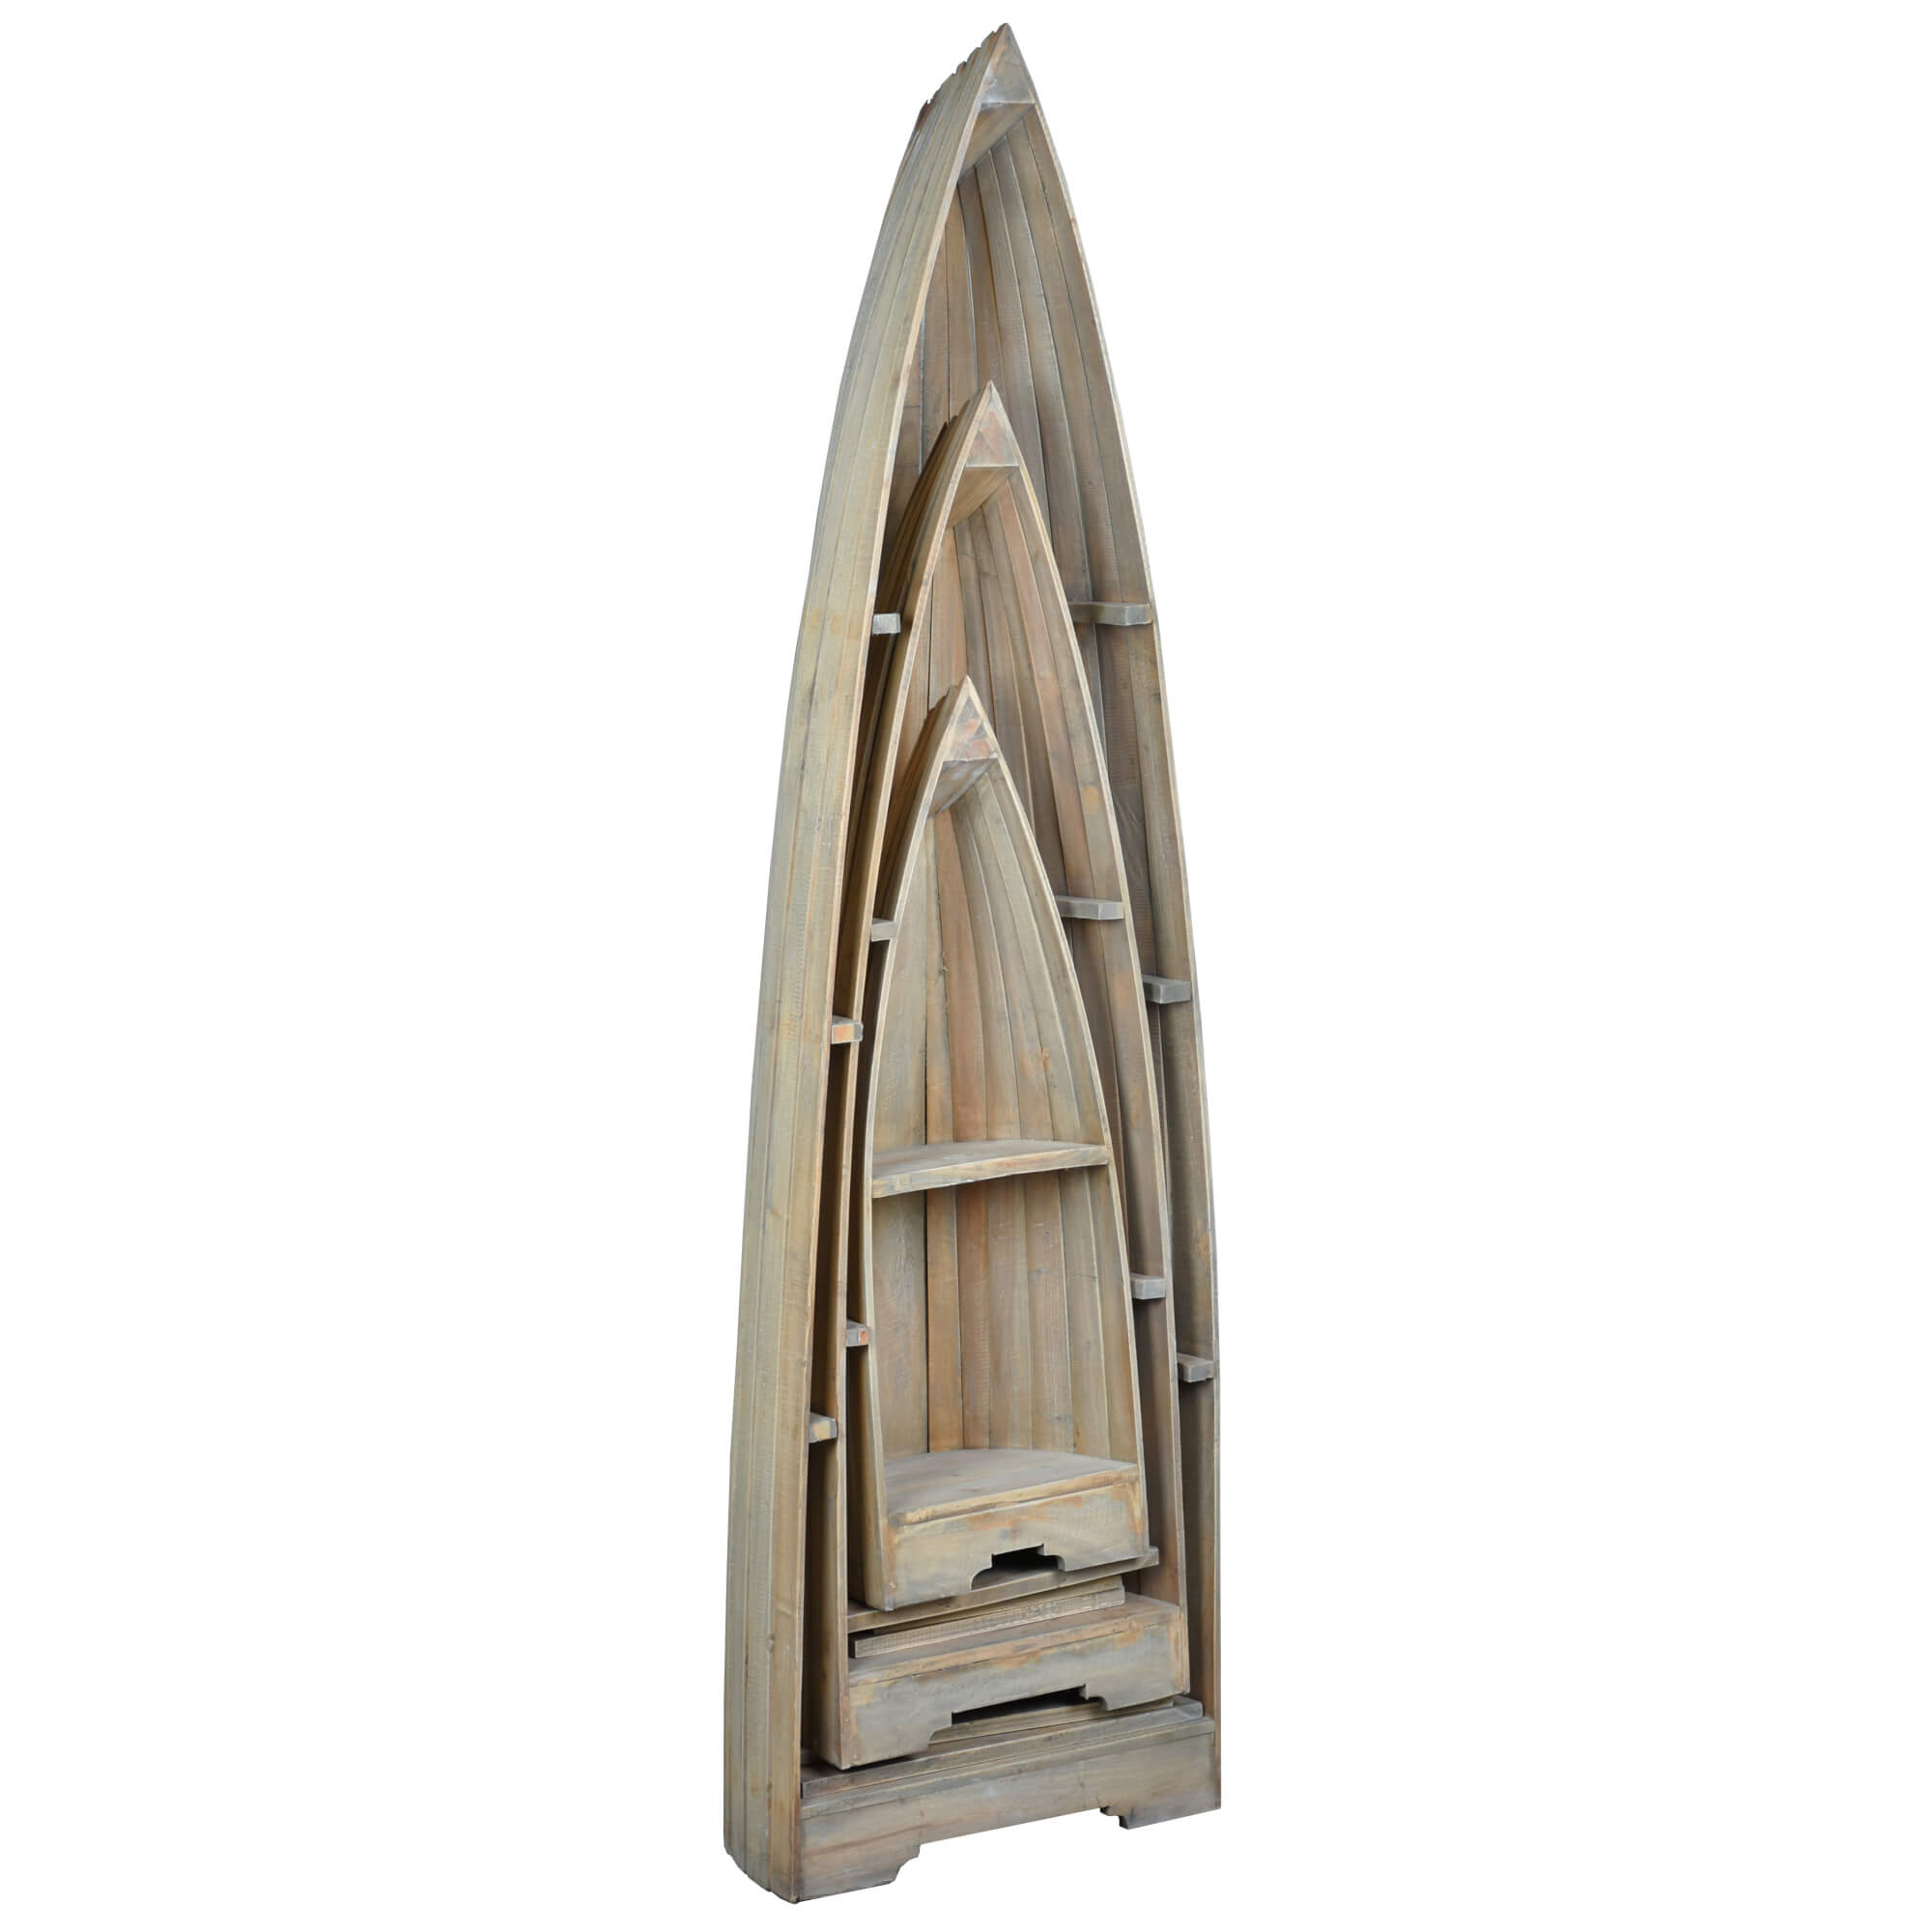 Wooden Boat Shelf, Standing Boat Display with Nepal